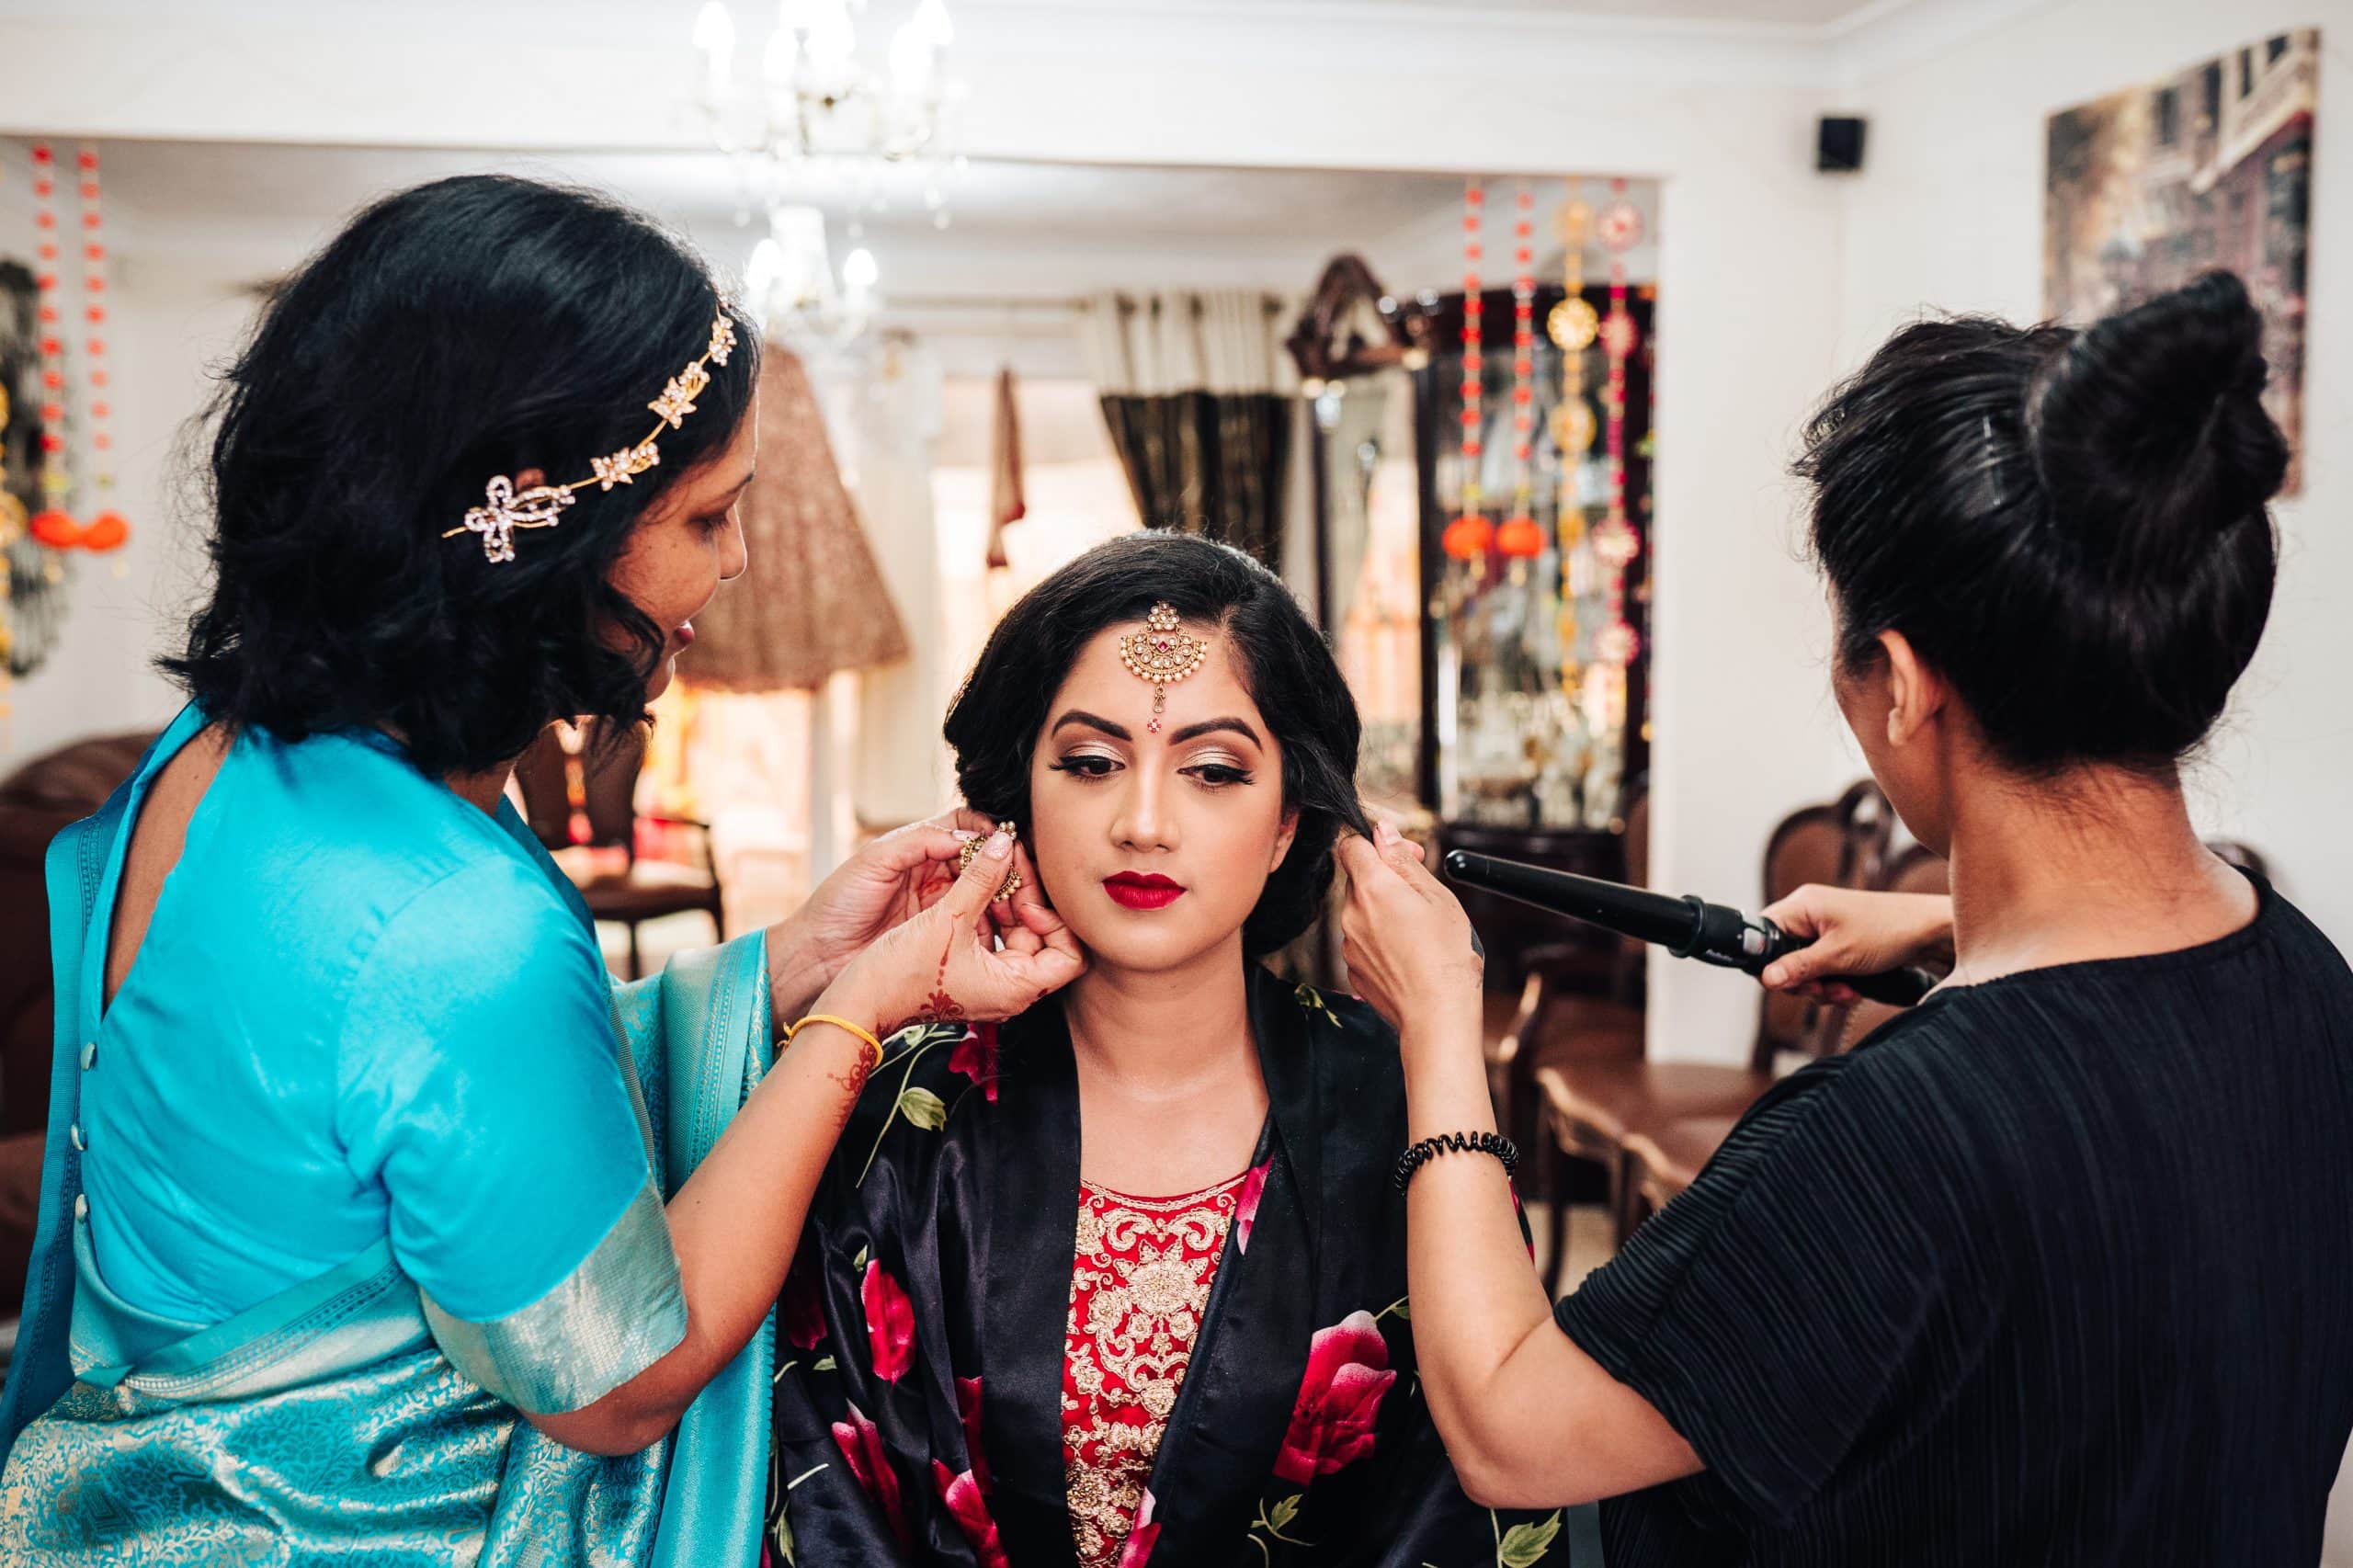 Indian bridal makeup in Gloucester. Mum and makeup artist help with the finishing touches before this bride gets married.